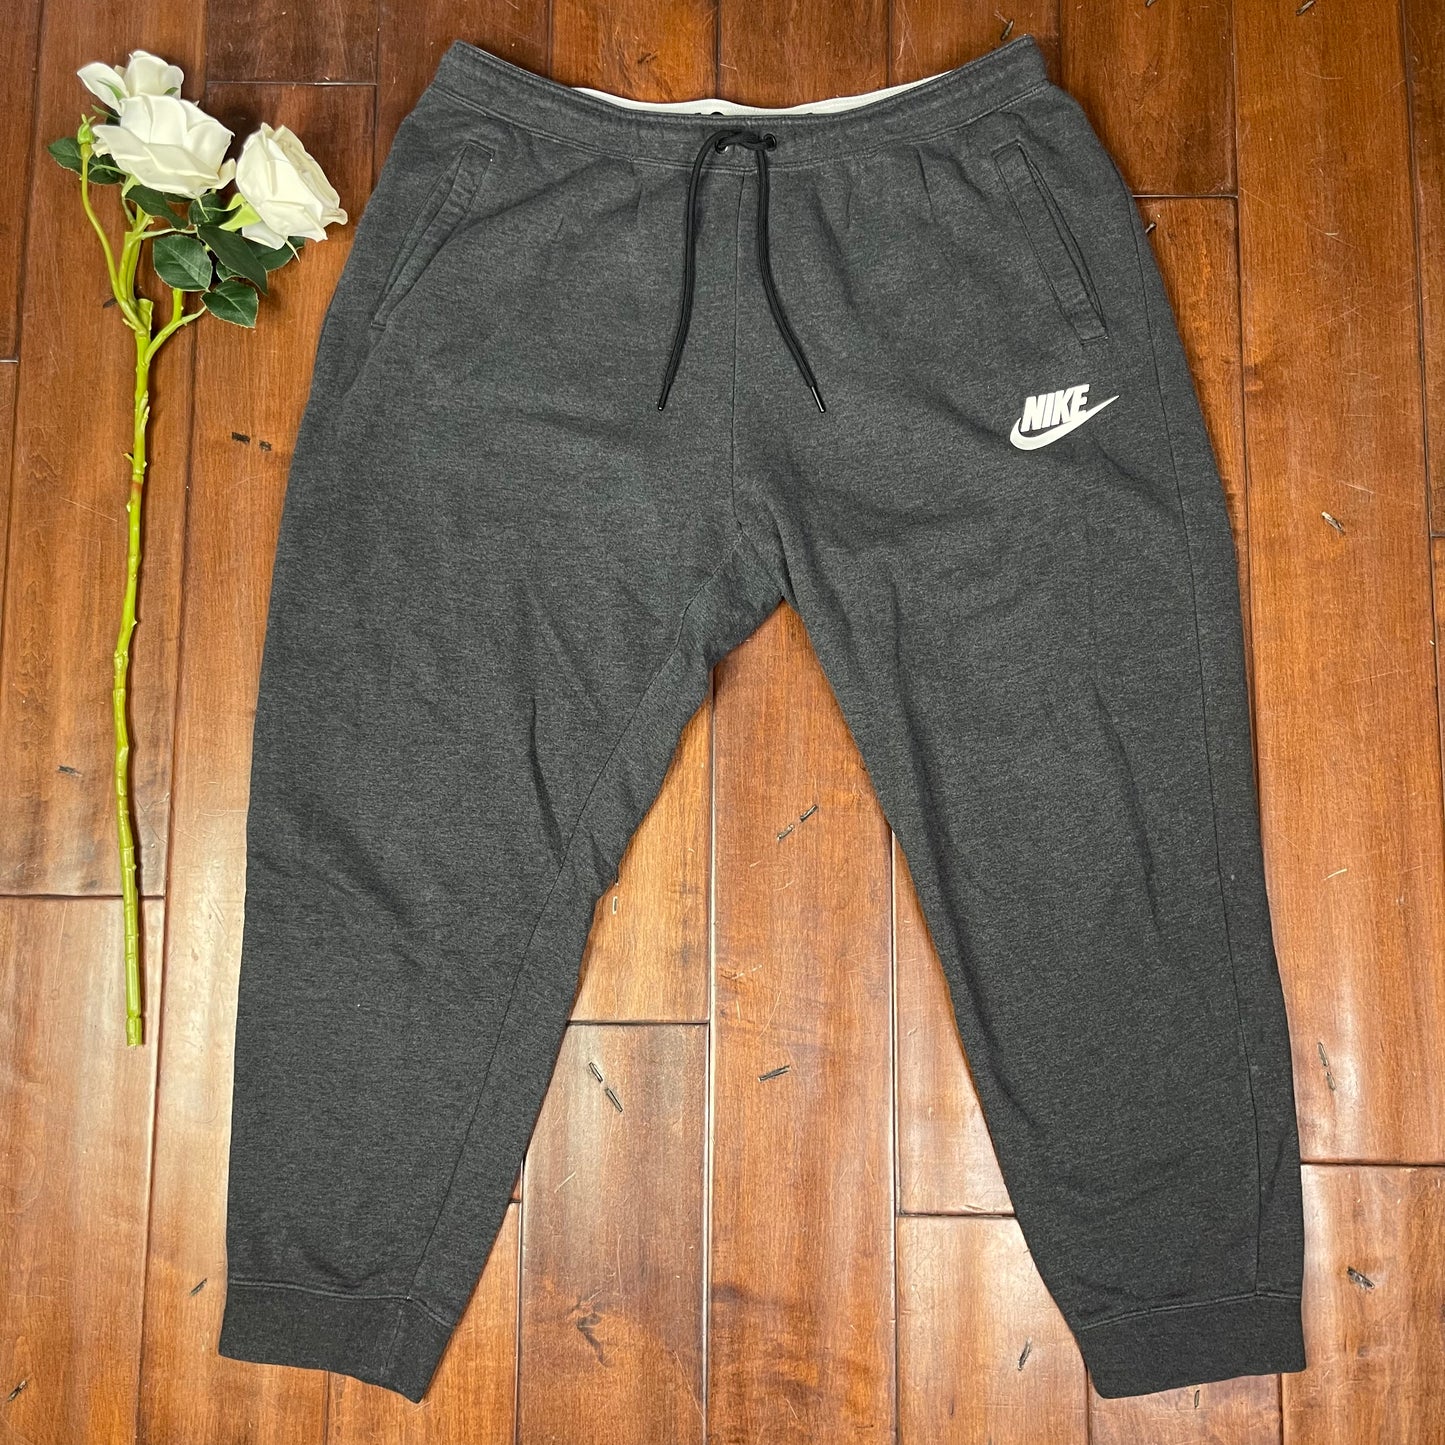 THRIFTED NIKE SWEATPANTS